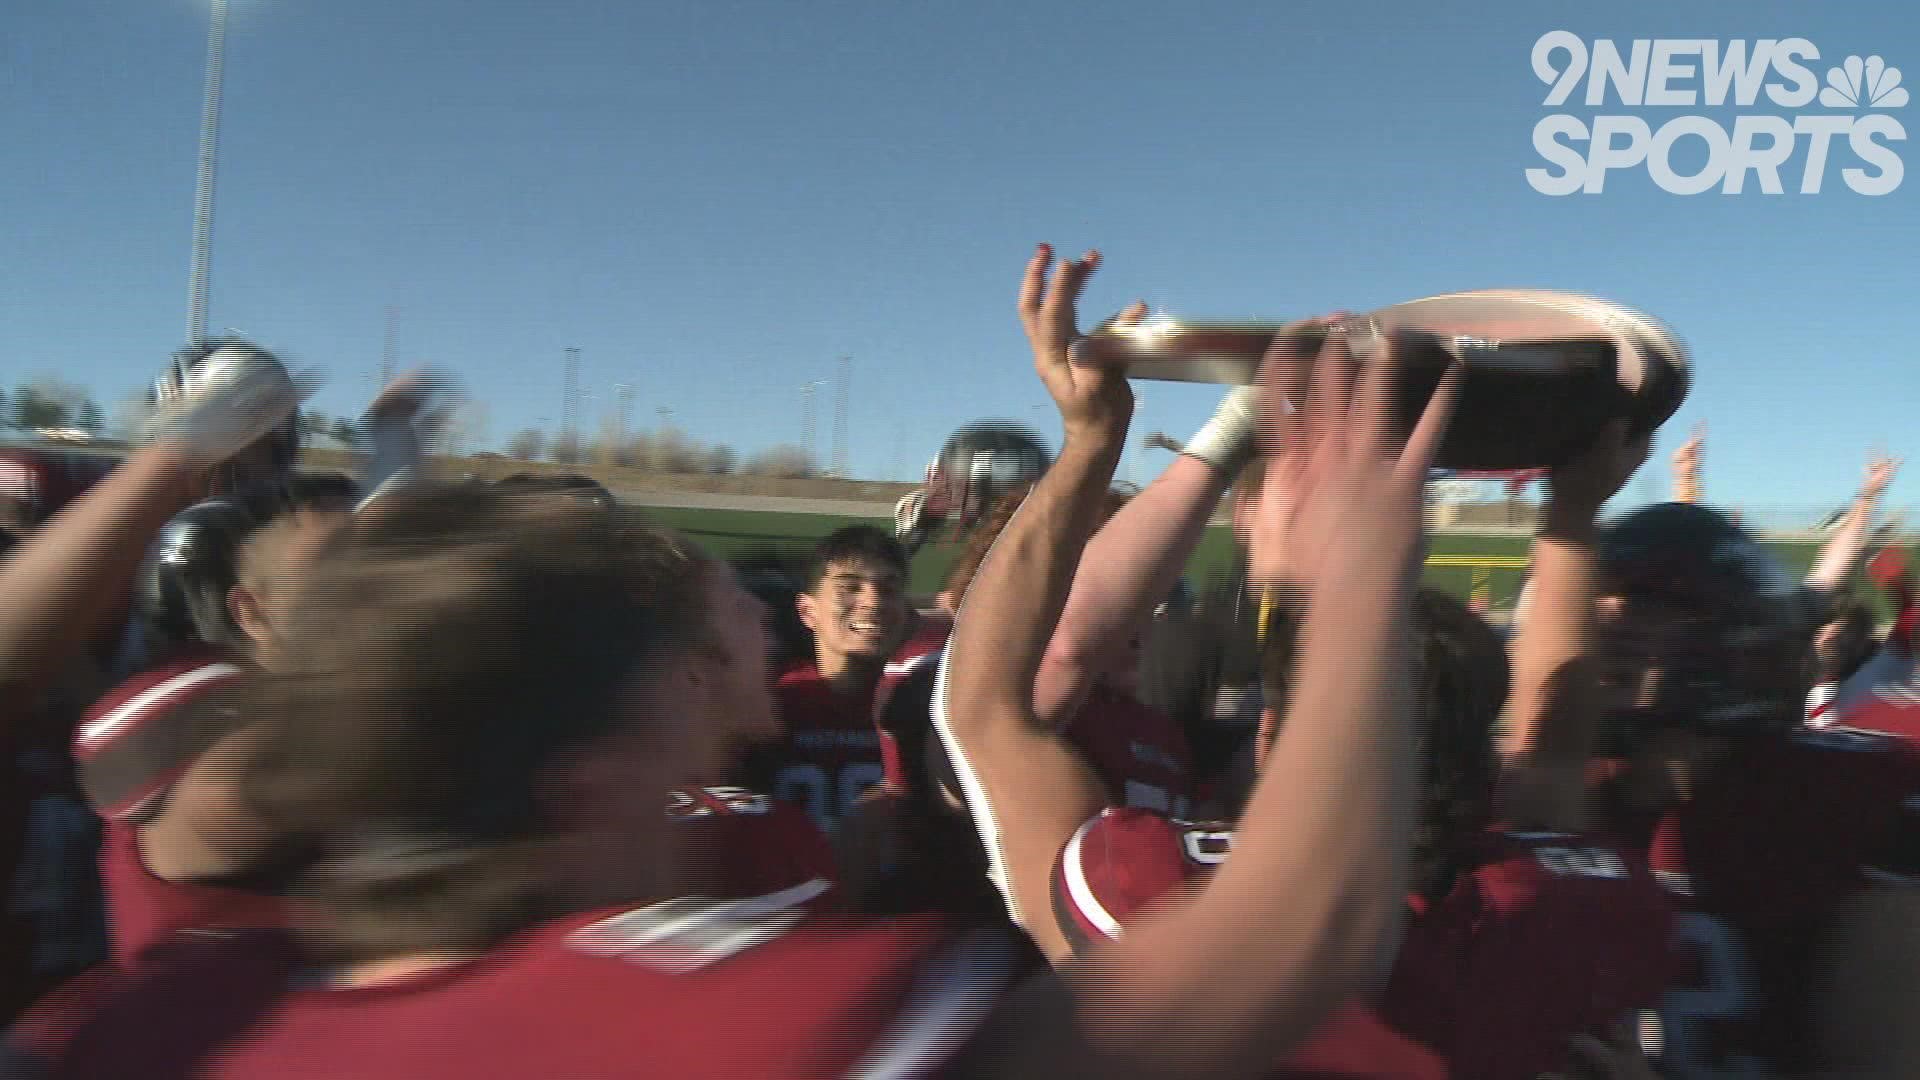 Cherry Creek won the 5A crown, Chatfield took home the 4A championship and Fort Morgan secured the 3A title.